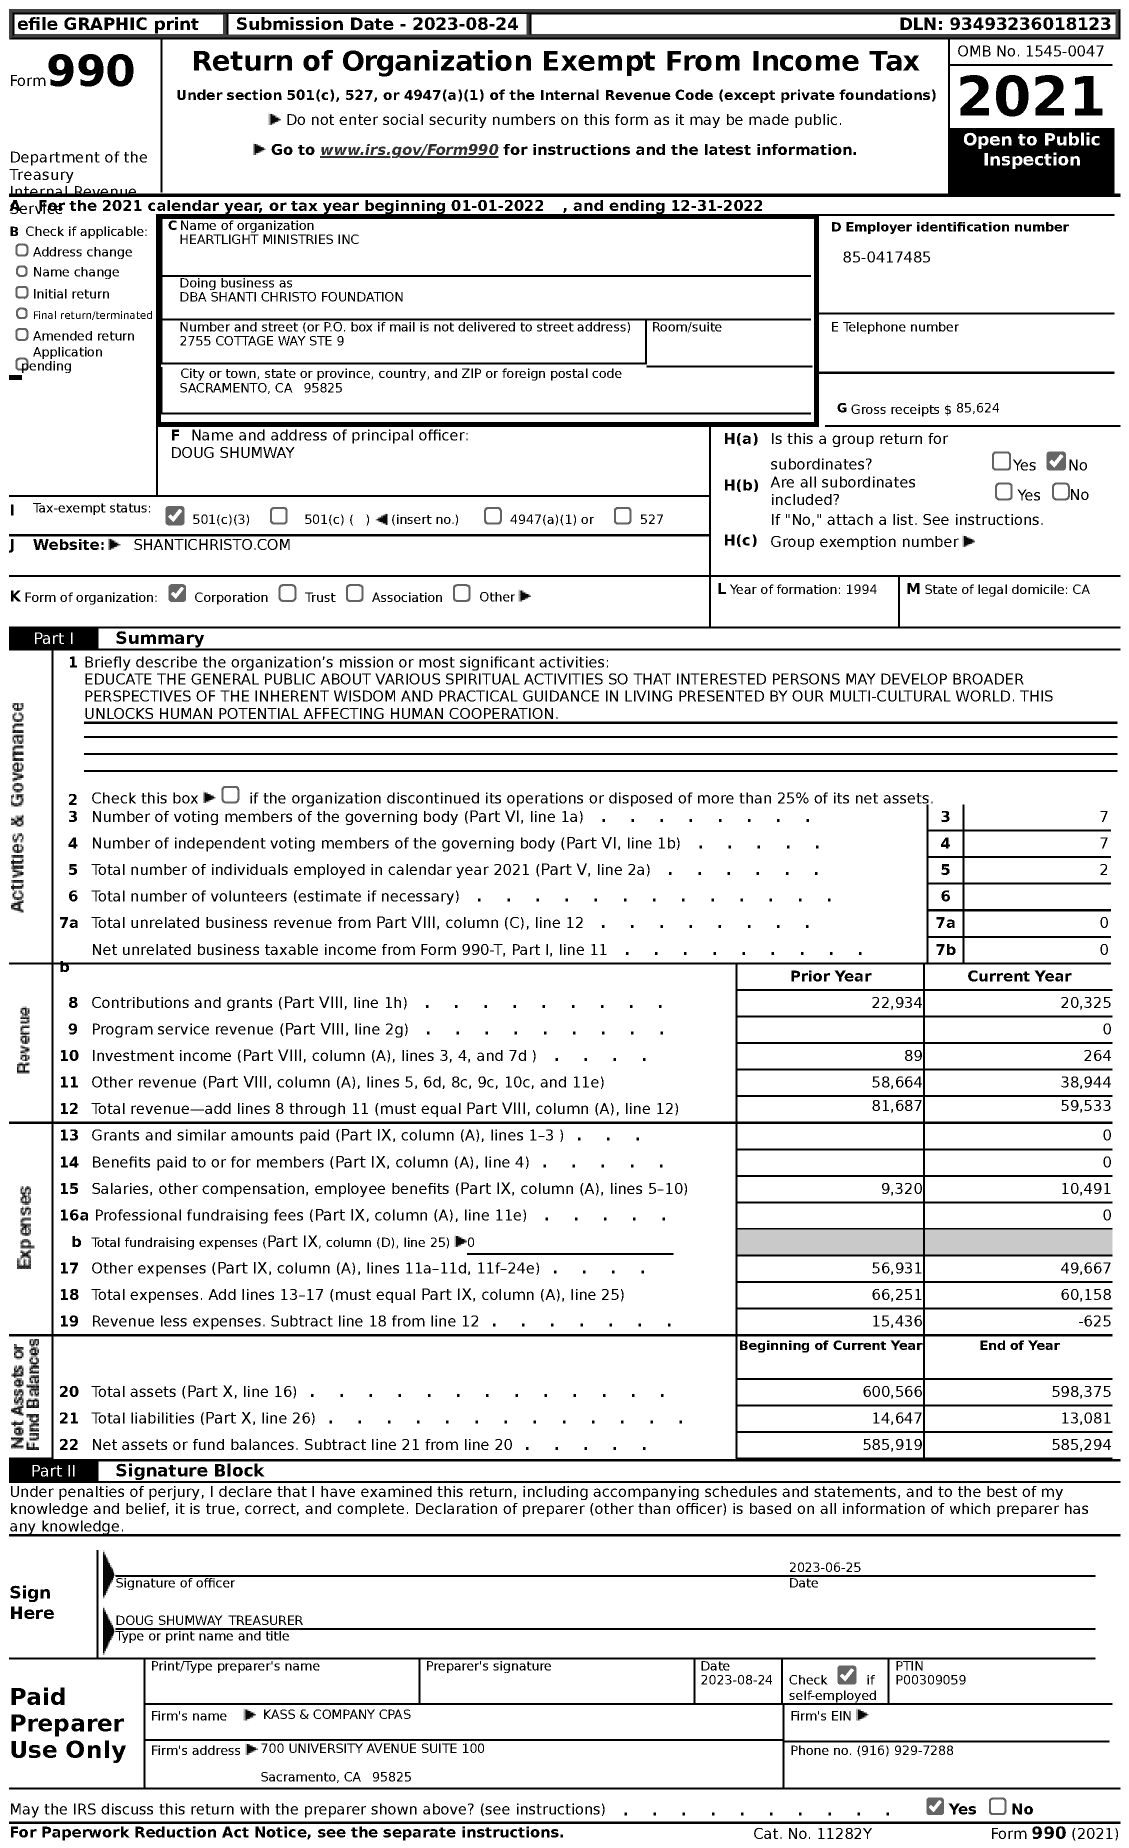 Image of first page of 2022 Form 990 for Shanti Christo Foundation